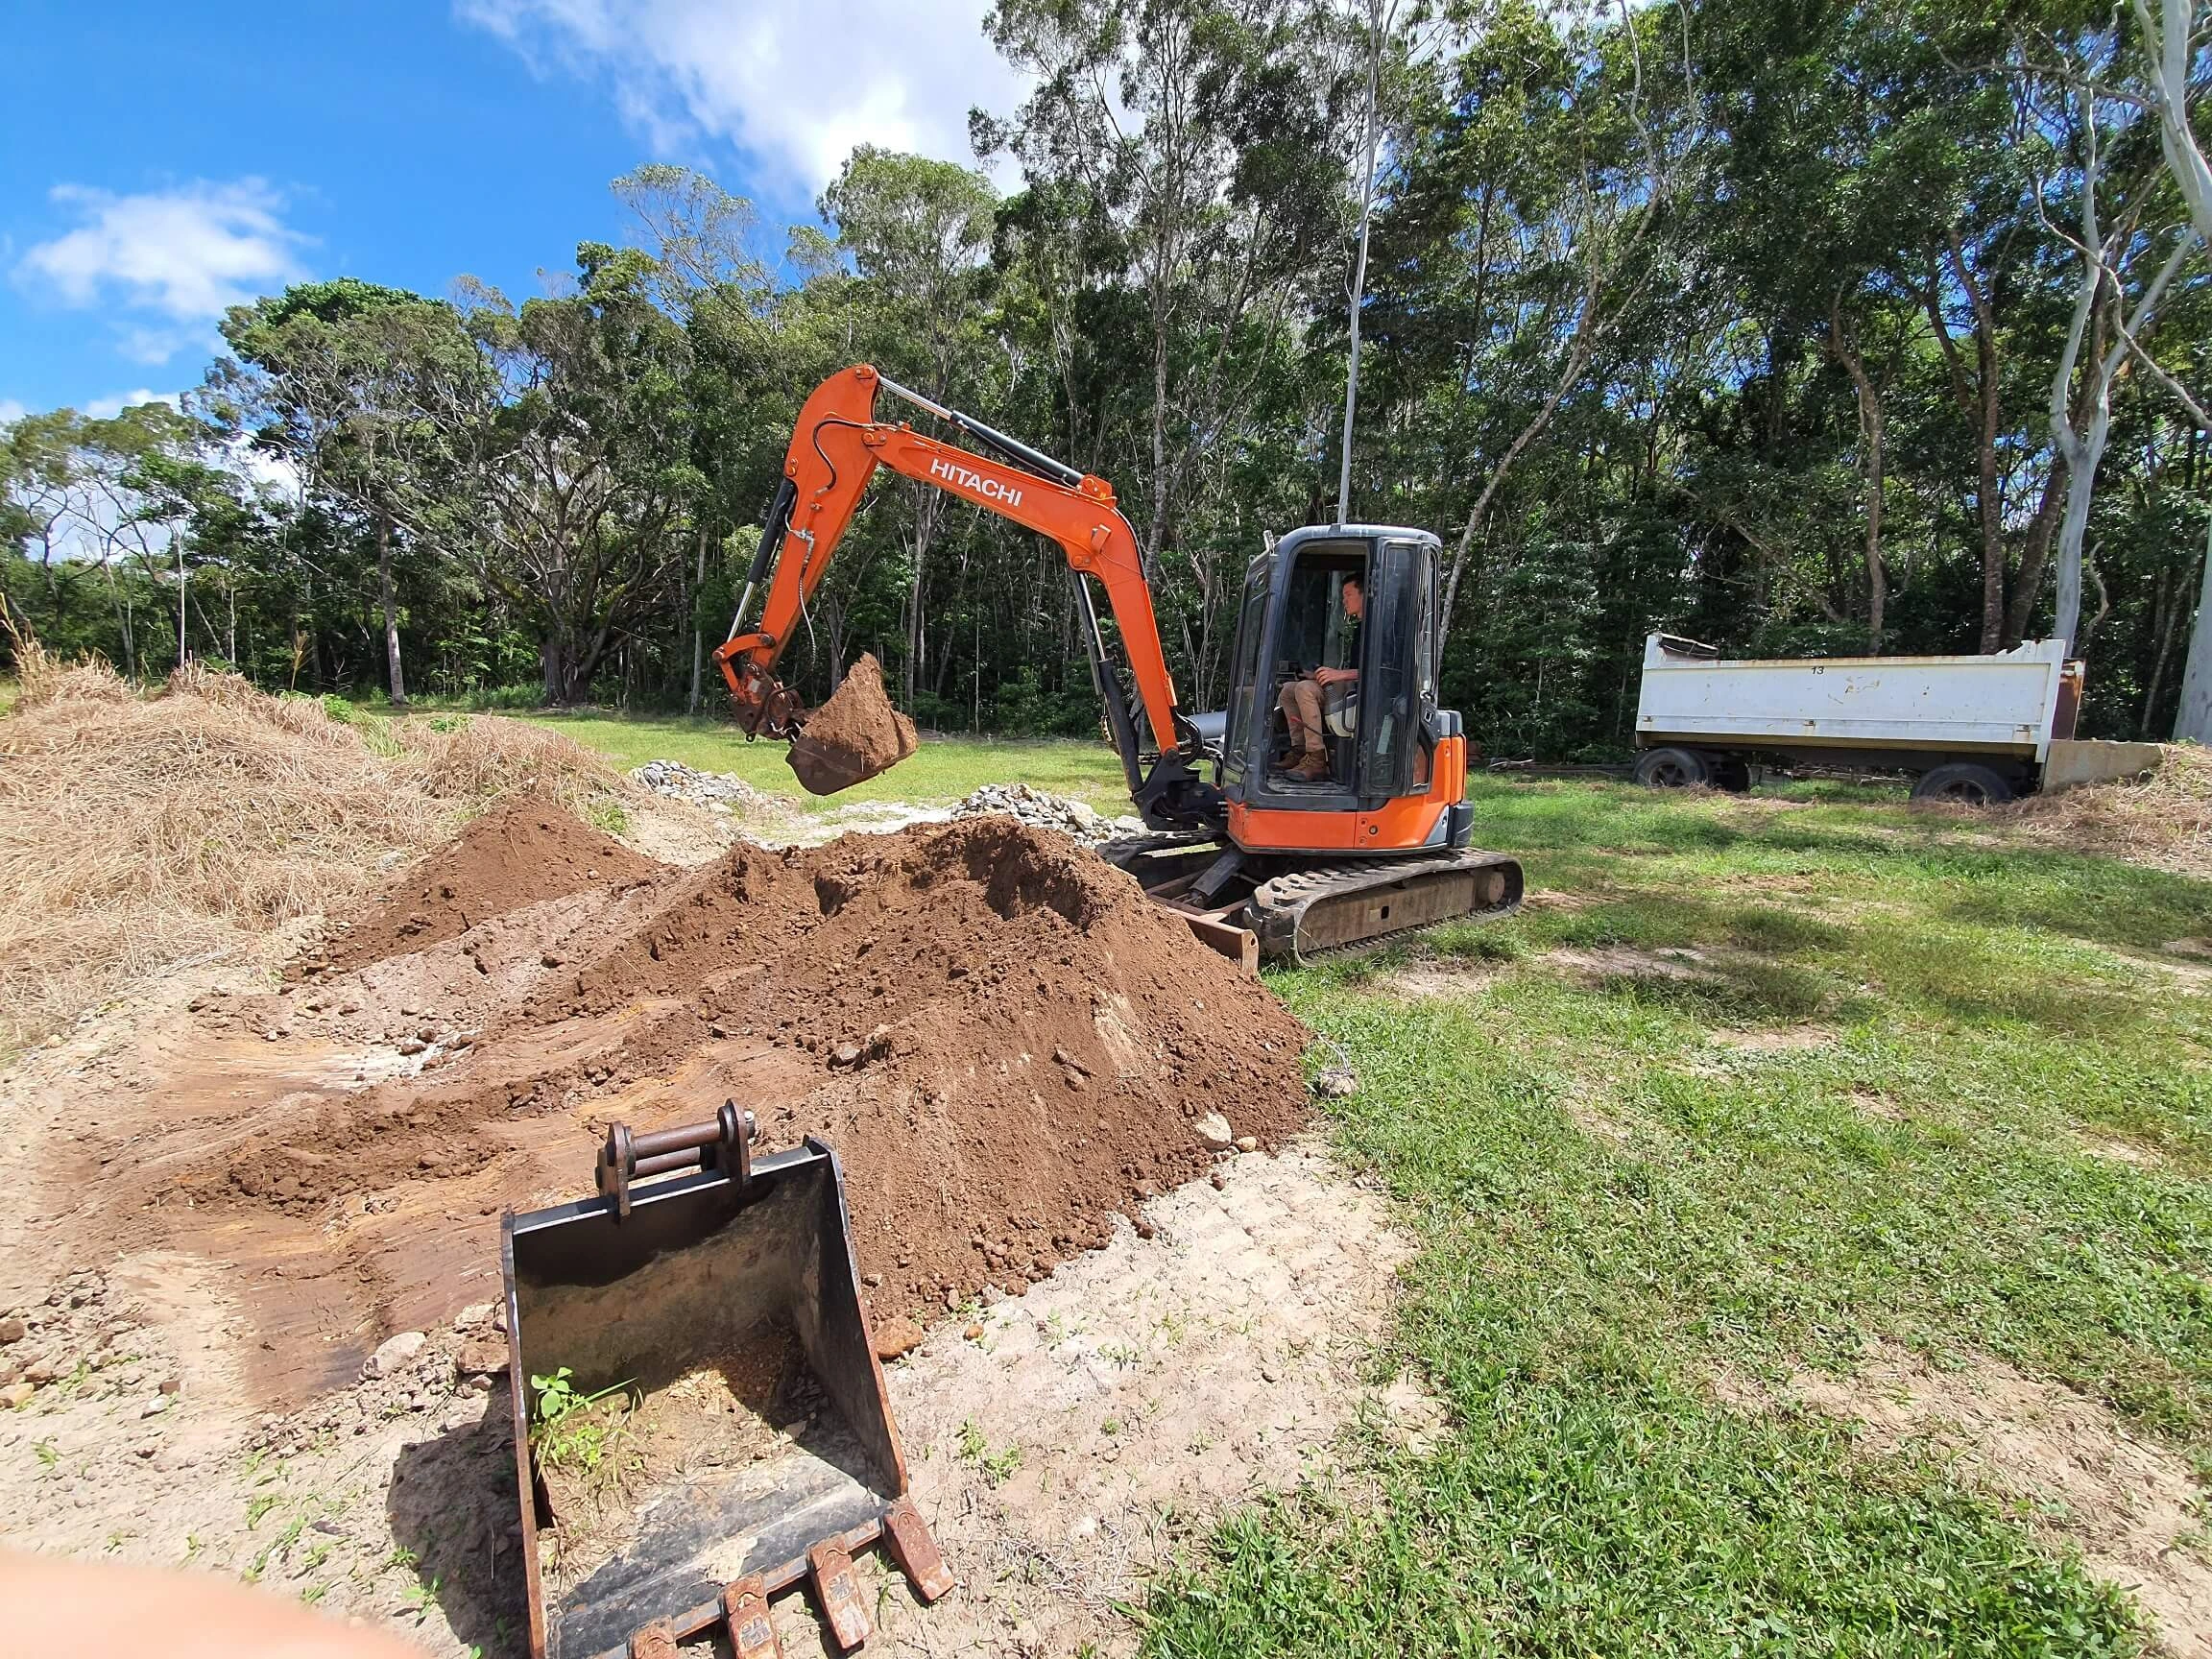 An orange excavator digs into a pile of dirt